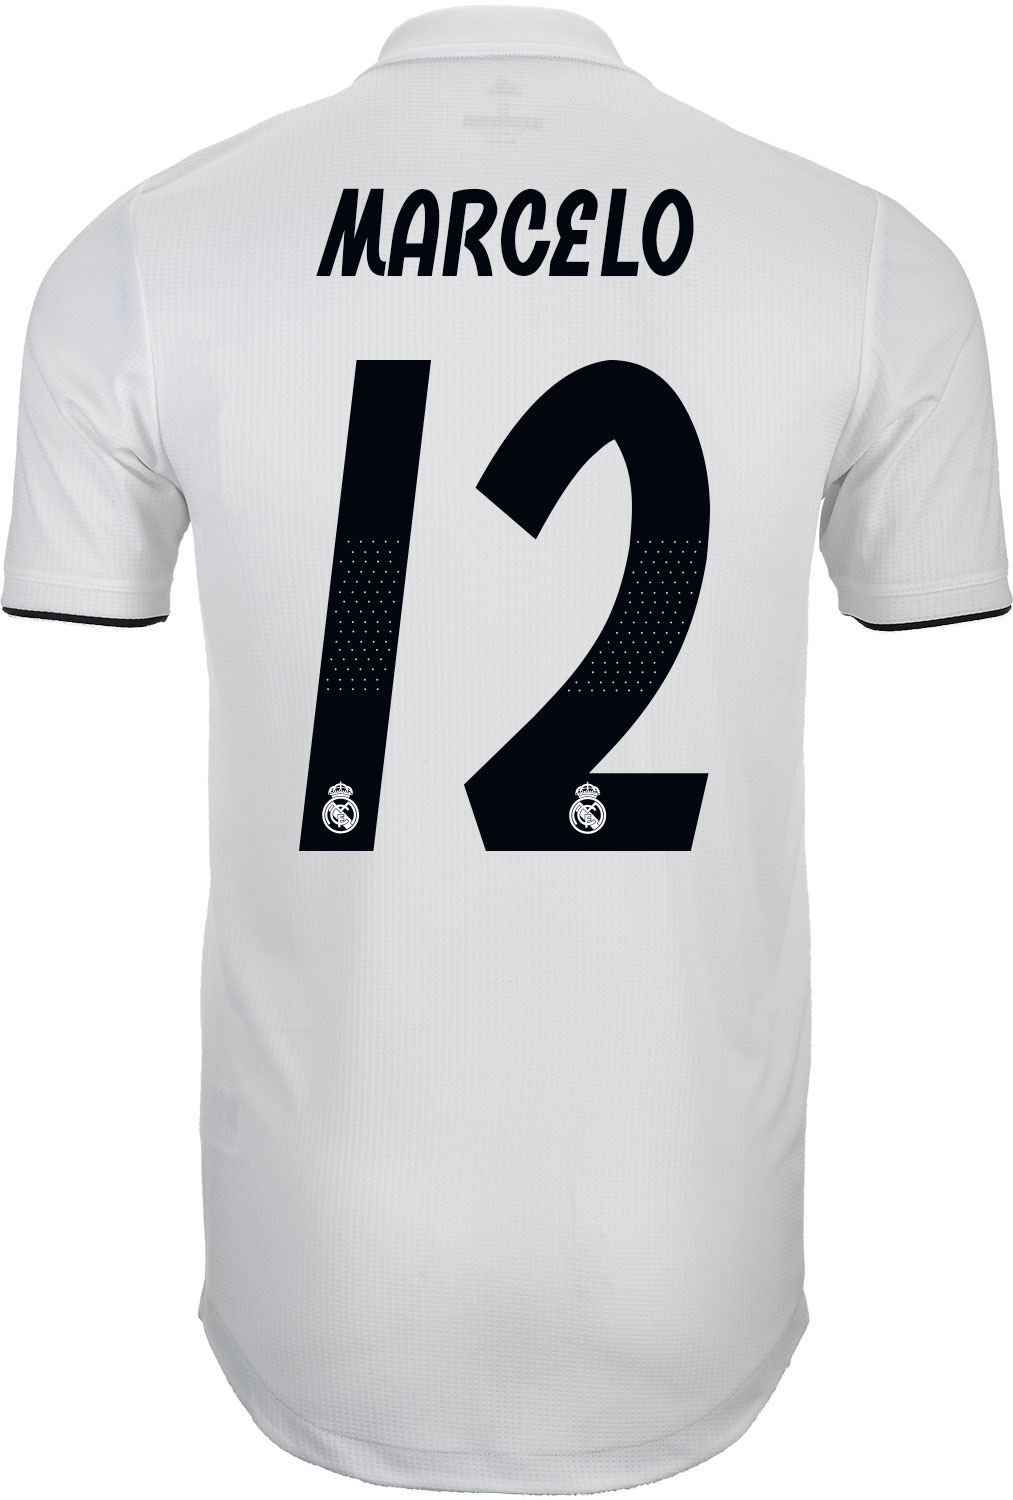 marcelo real madrid jersey